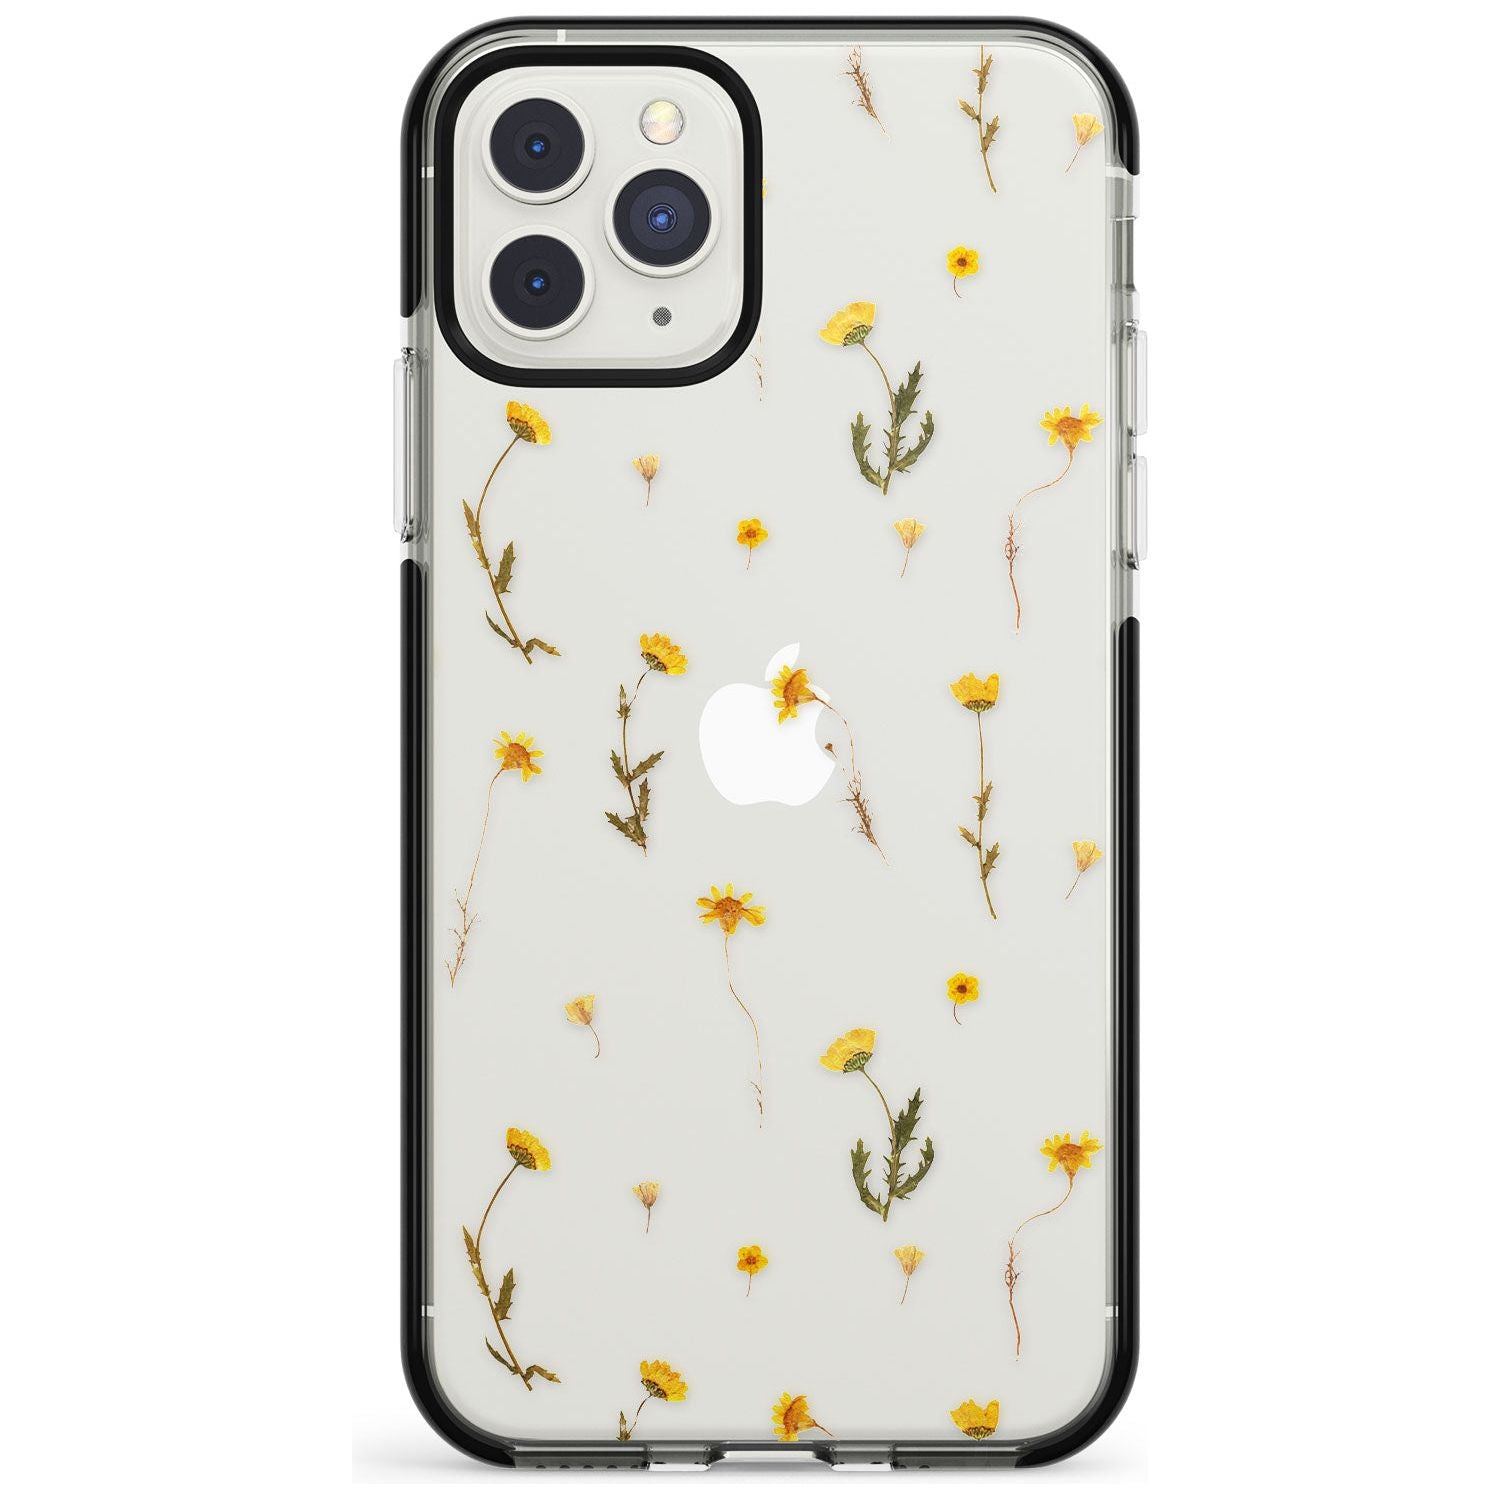 Mixed Yellow Flowers - Dried Flower-Inspired Black Impact Phone Case for iPhone 11 Pro Max